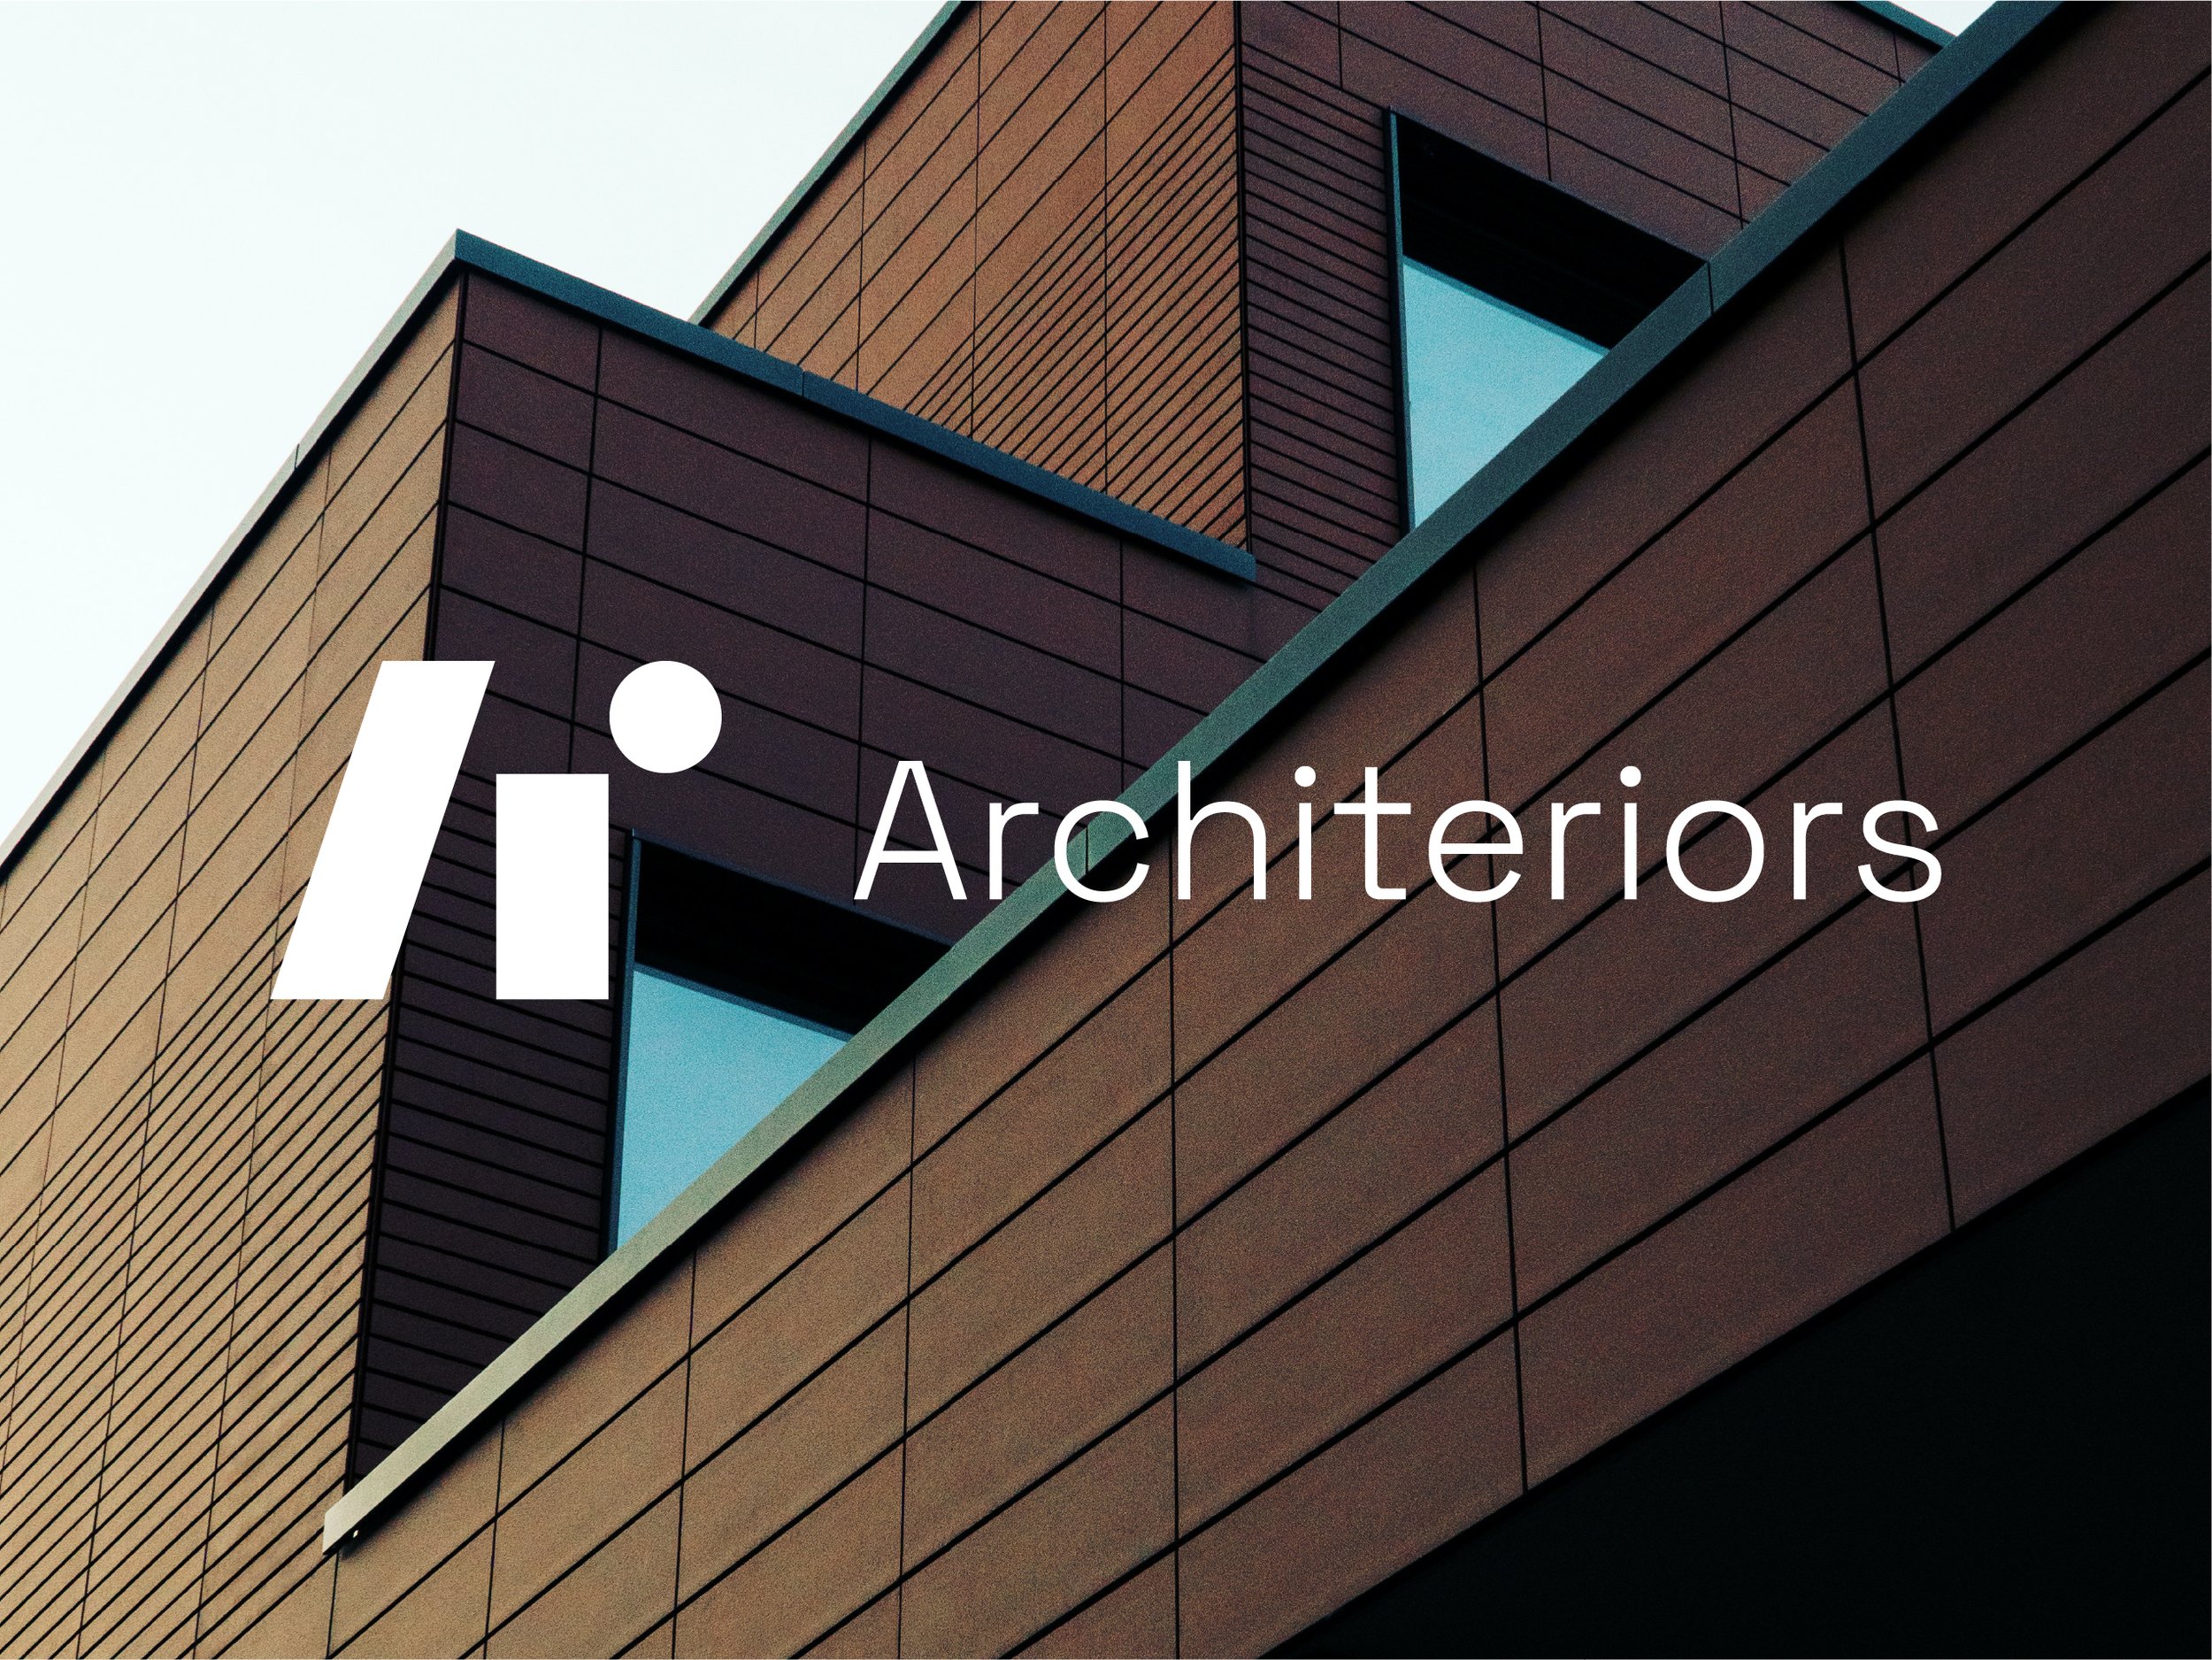 Delivering High-Quality Graphic Design Solutions for Architeriors, the UAE-based Interior Design and Fit Out Consultants